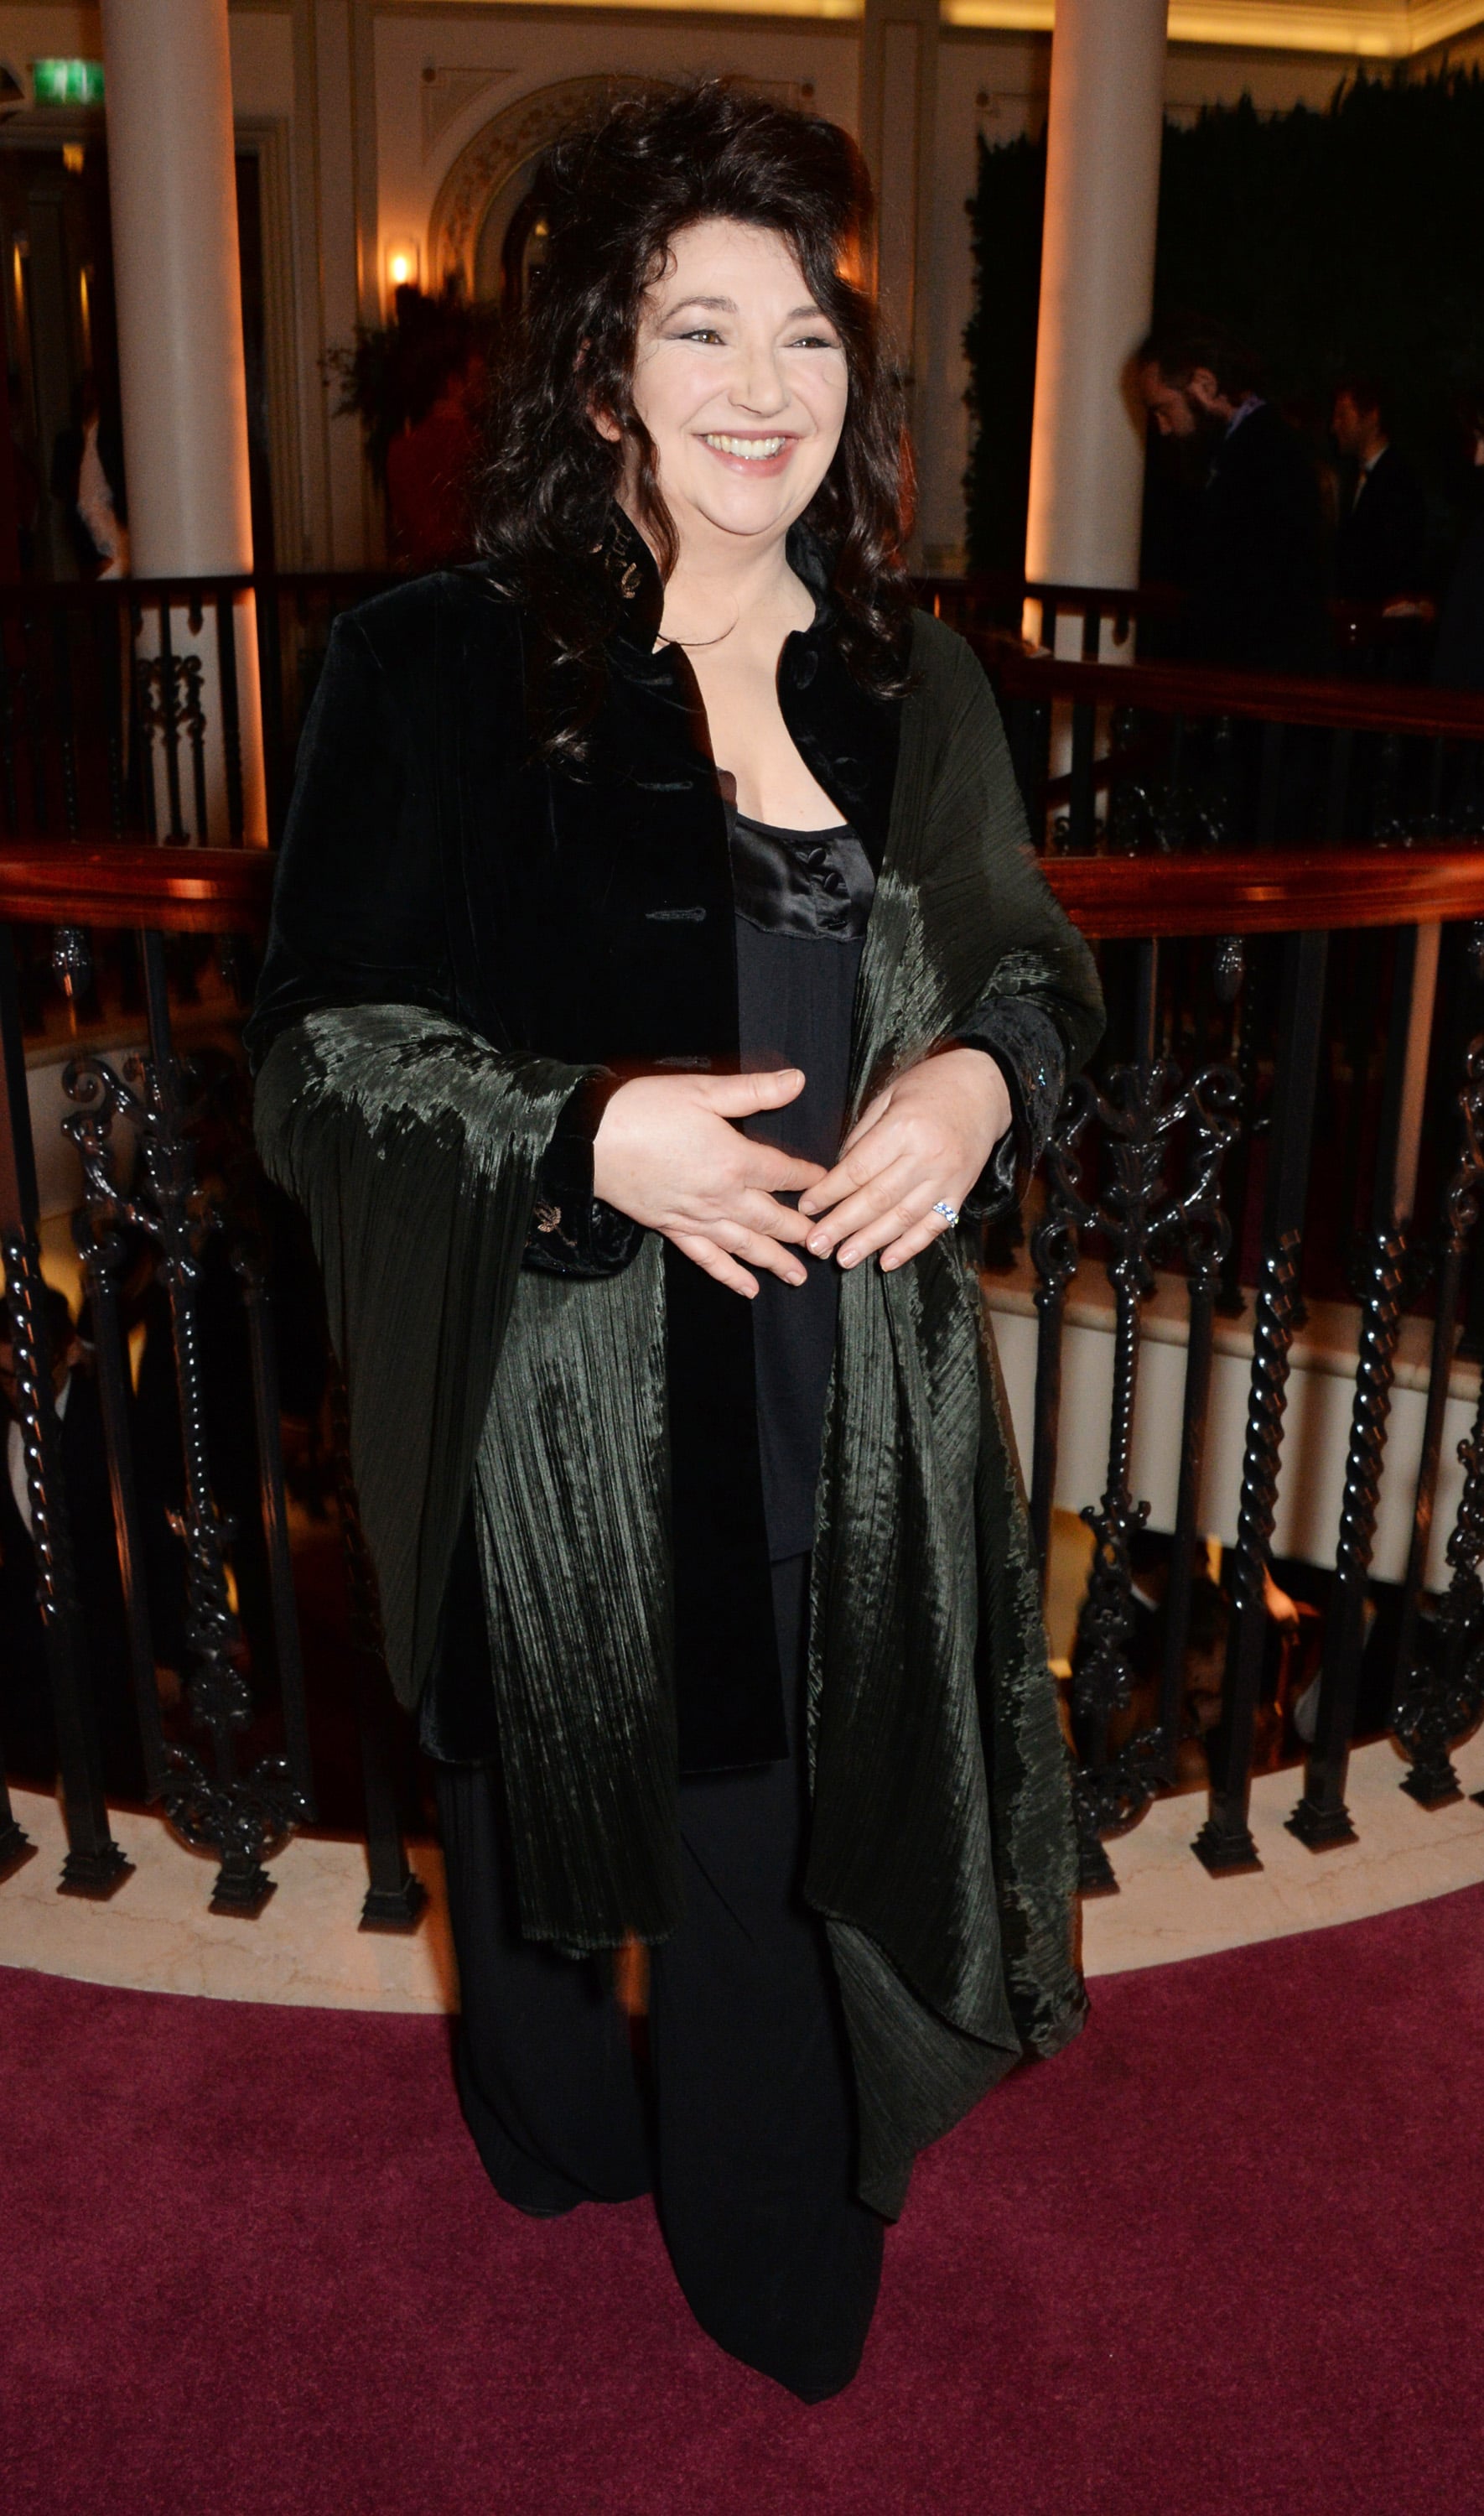 LONDON, ENGLAND - NOVEMBER 30:  Kate Bush attends a champagne reception at the 60th London Evening Standard Theatre Awards at the London Palladium on November 30, 2014 in London, England.  (Photo by David M. Benett/Getty Images)